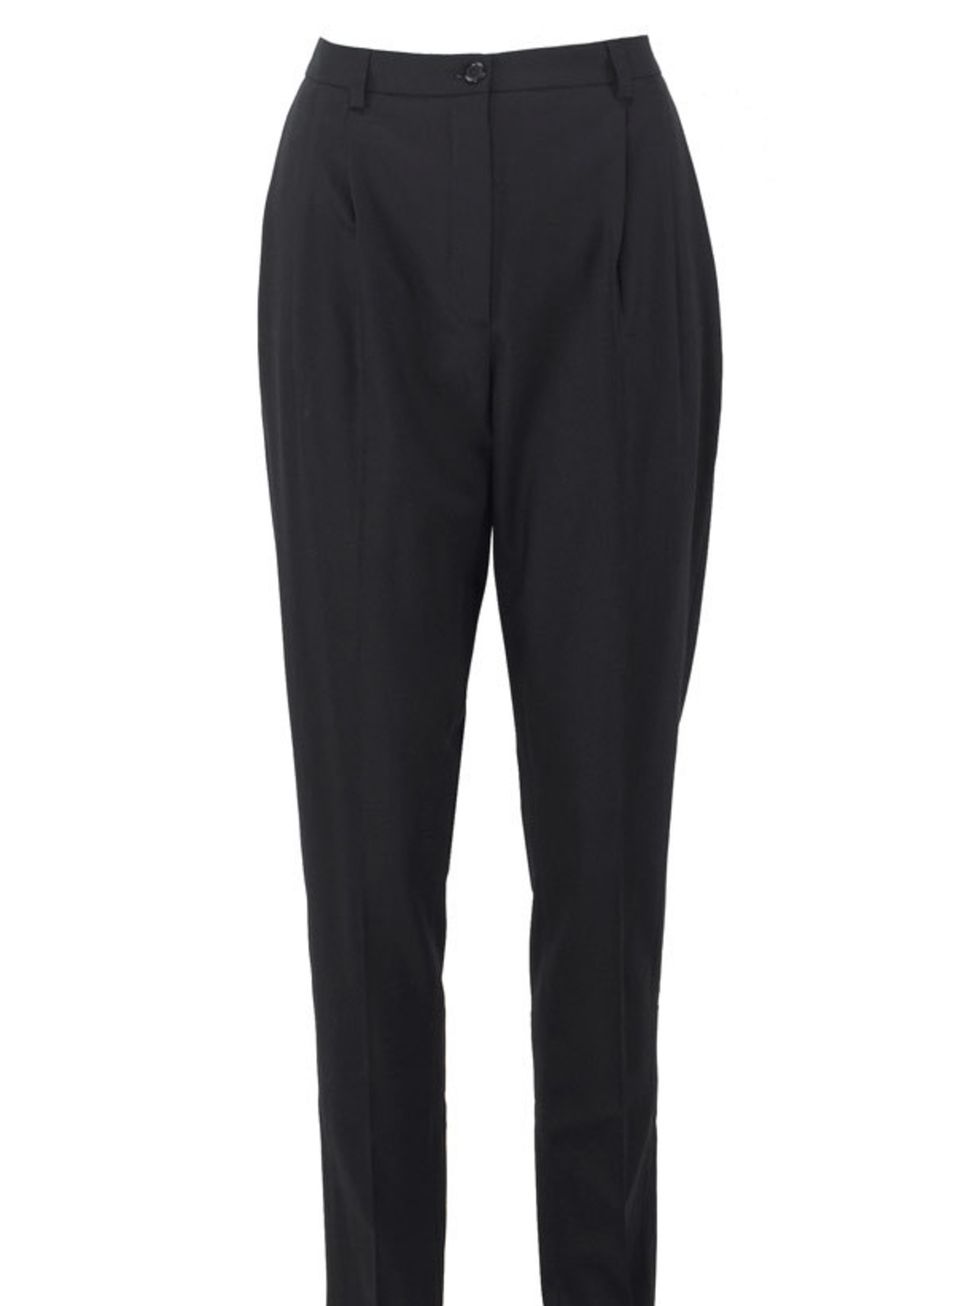 <p>Dagmar trousers ,£159, available at <a href="http://www.fenwick.co.uk/">Fenwick</a></p>